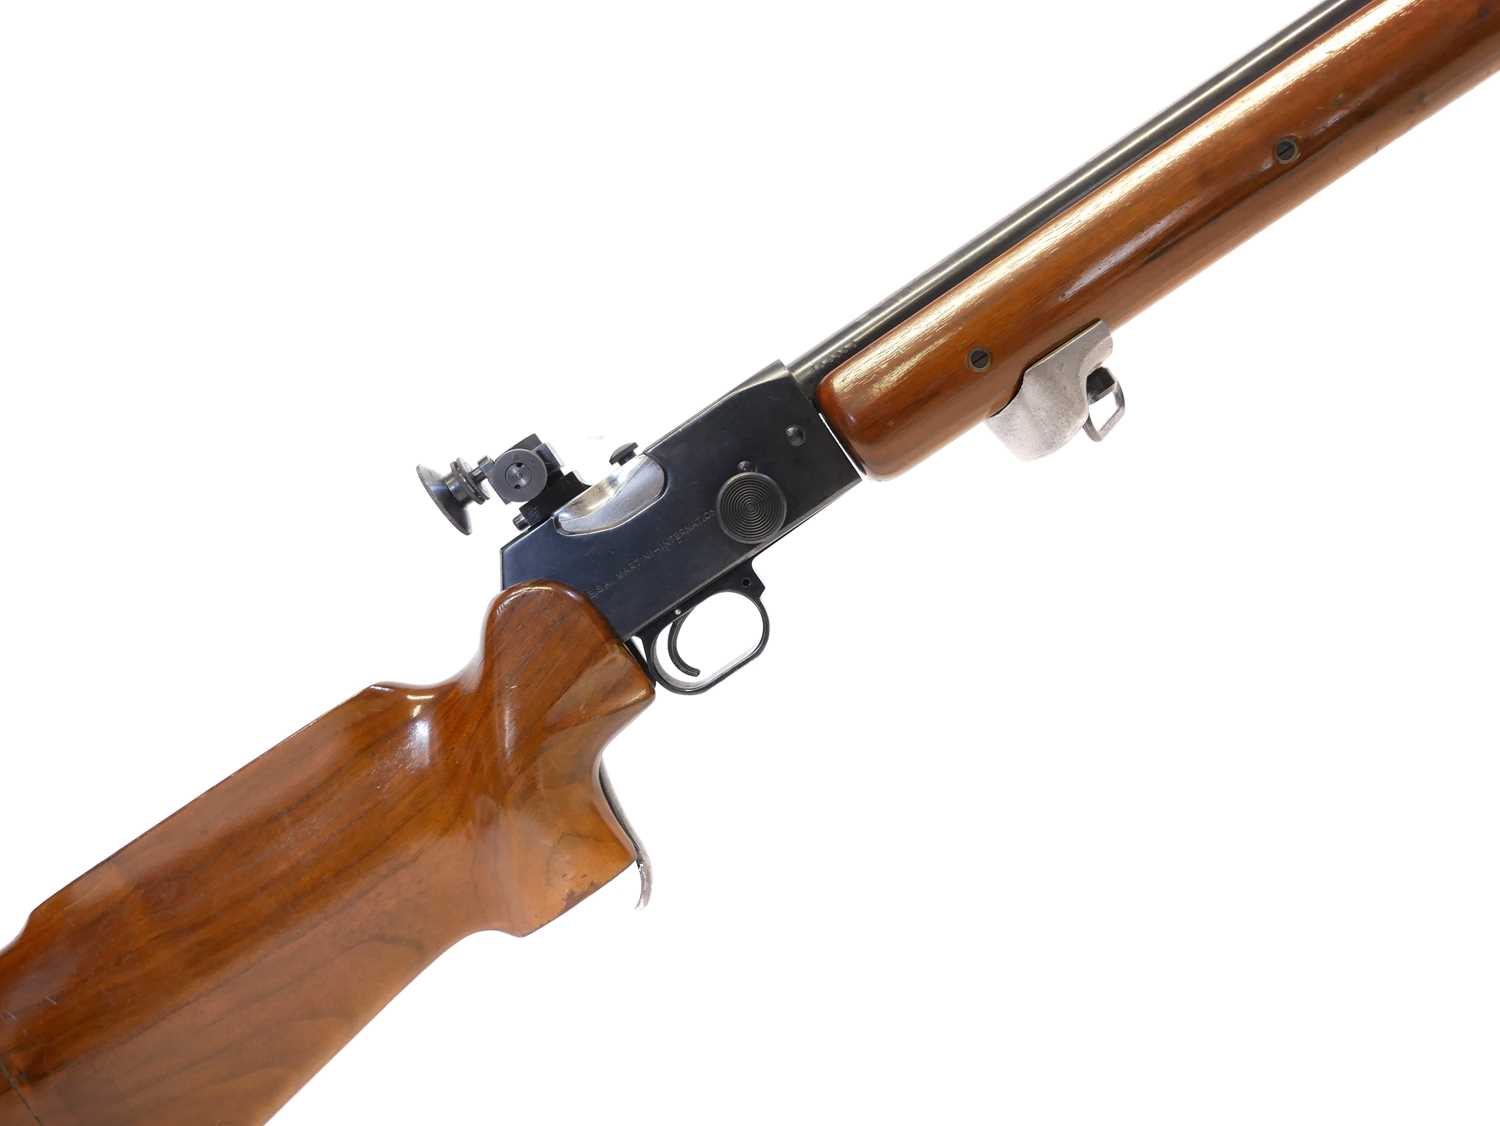 BSA International .22lr Martini target rifle, serial number FG0963, 28 inch barrel, fitted with